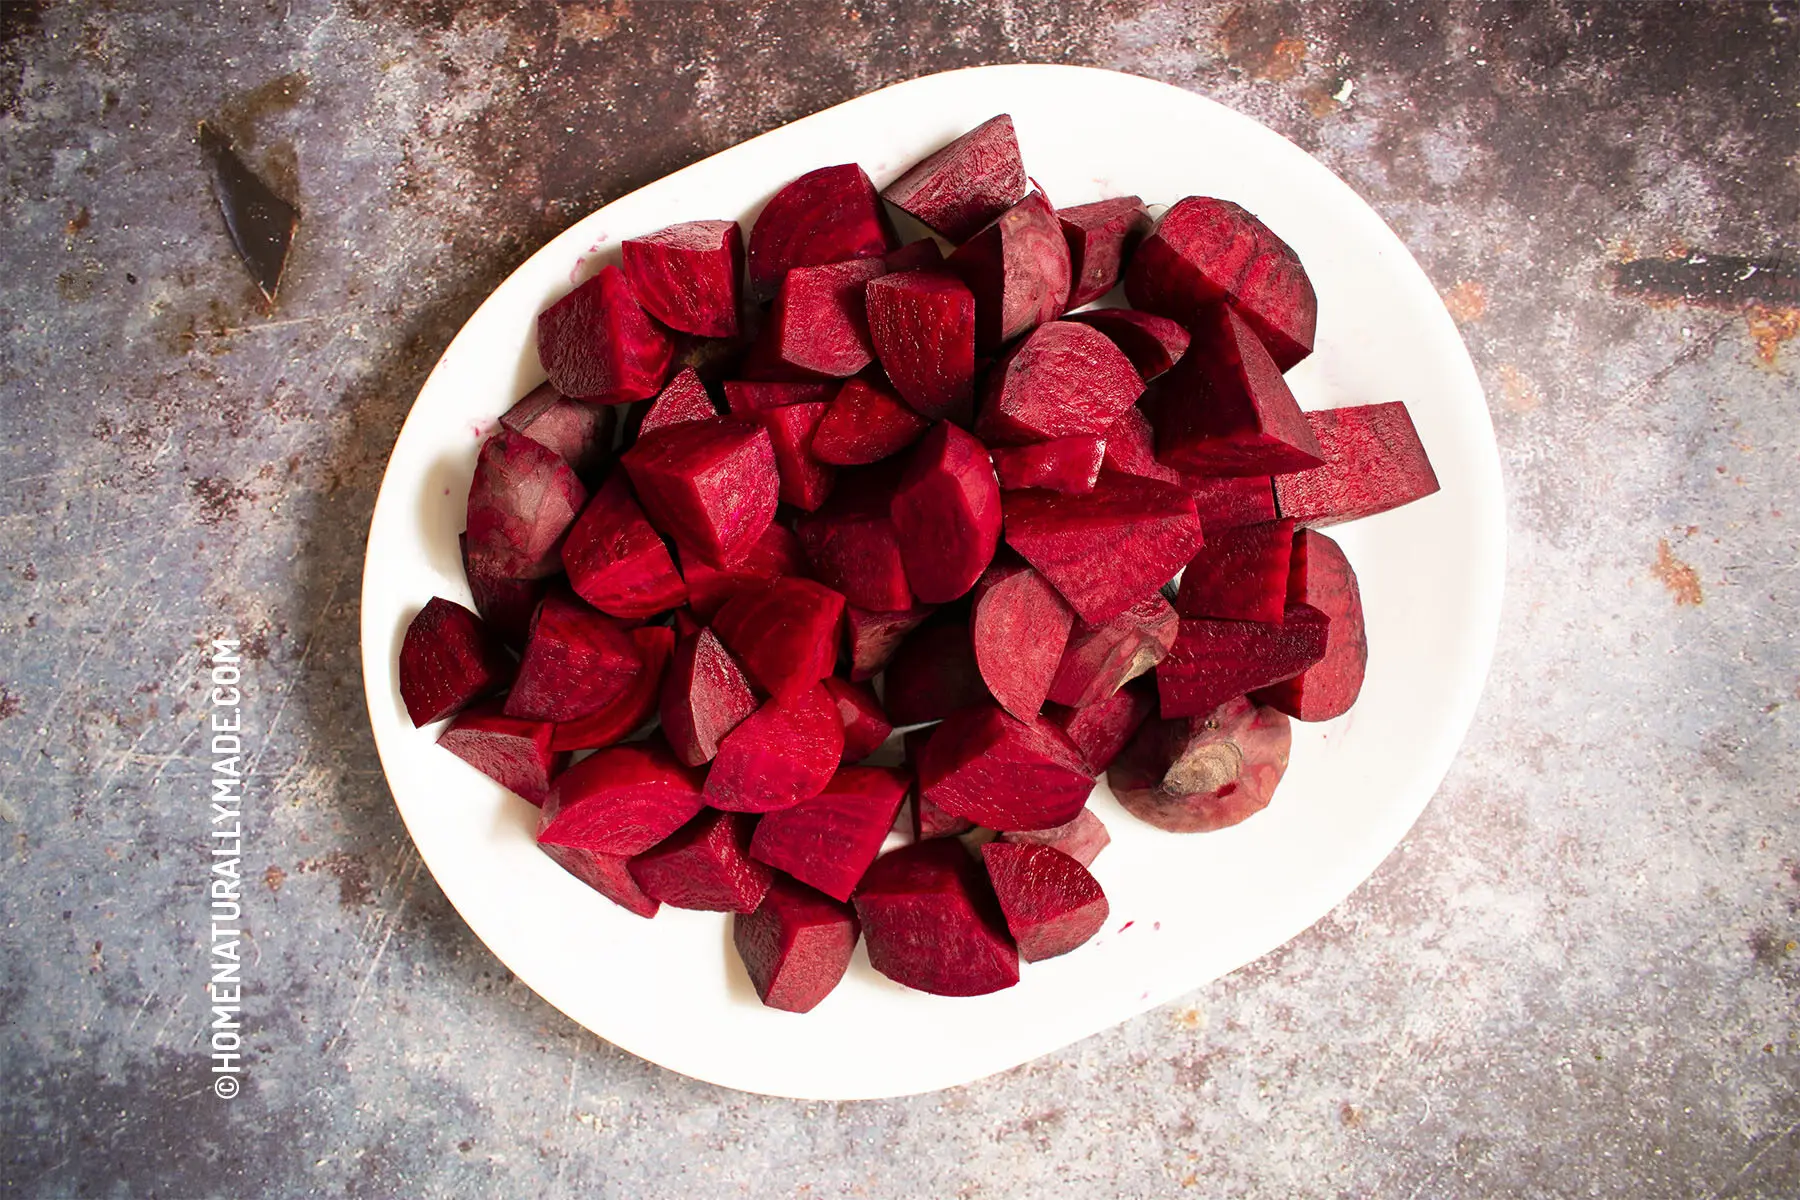 Cut peeled beet into optimal size and shape for the juicer